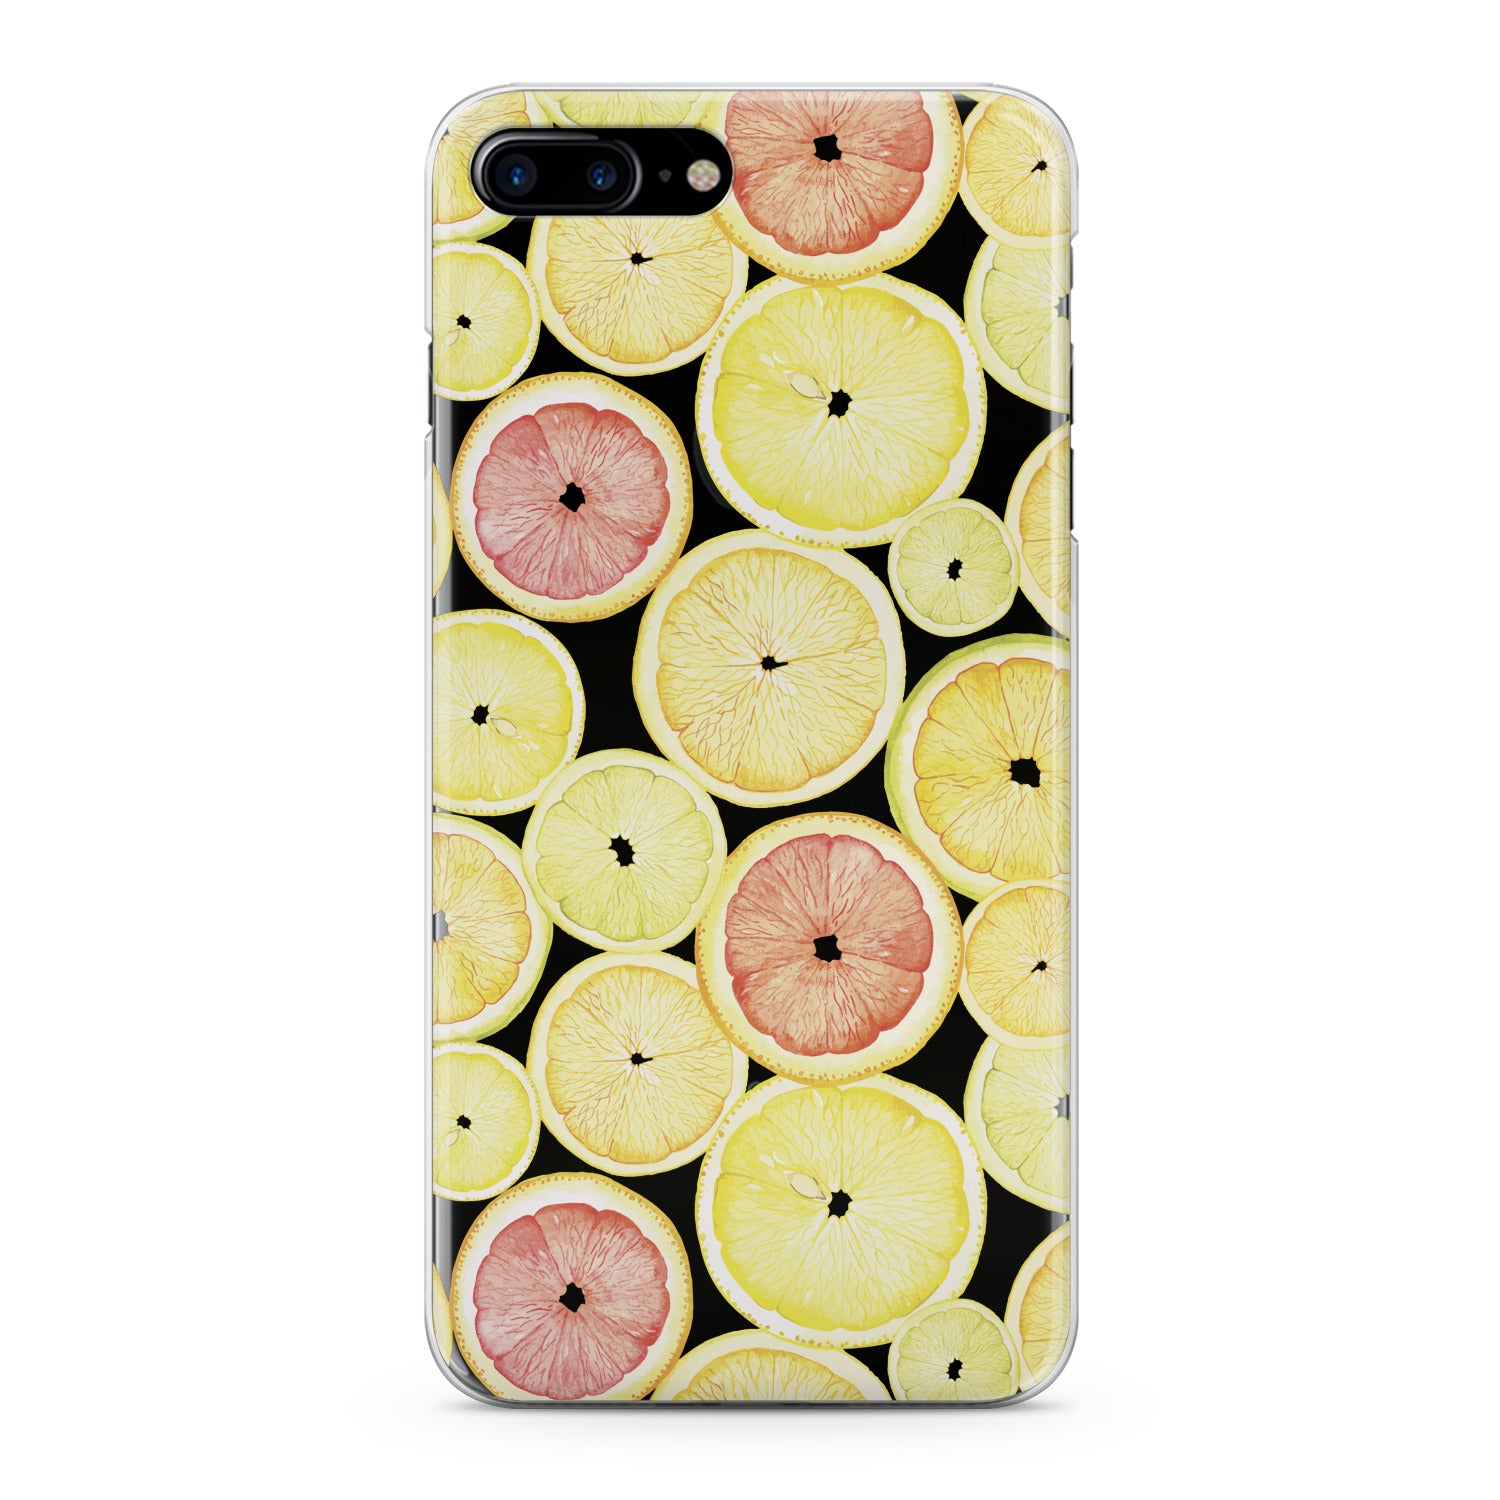 Lex Altern Yellow Lemon Phone Case for your iPhone & Android phone.